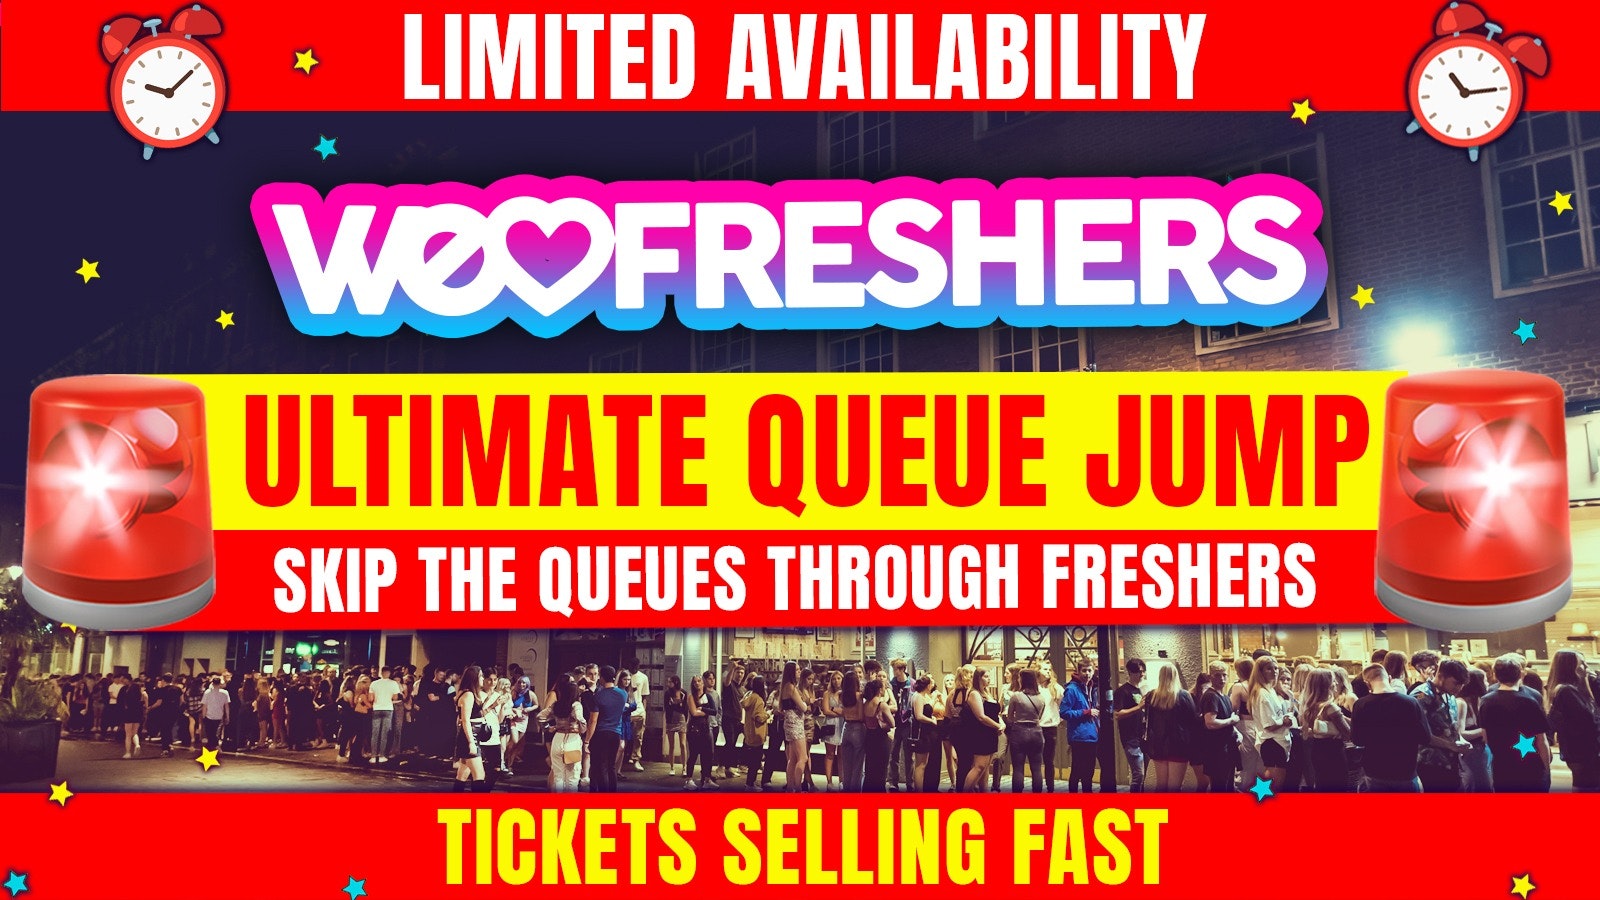 WE LOVE FRESHERS UK TOUR – ULTIMATE QUEUE JUMP PASS!  – Valid for all UK We Love Events